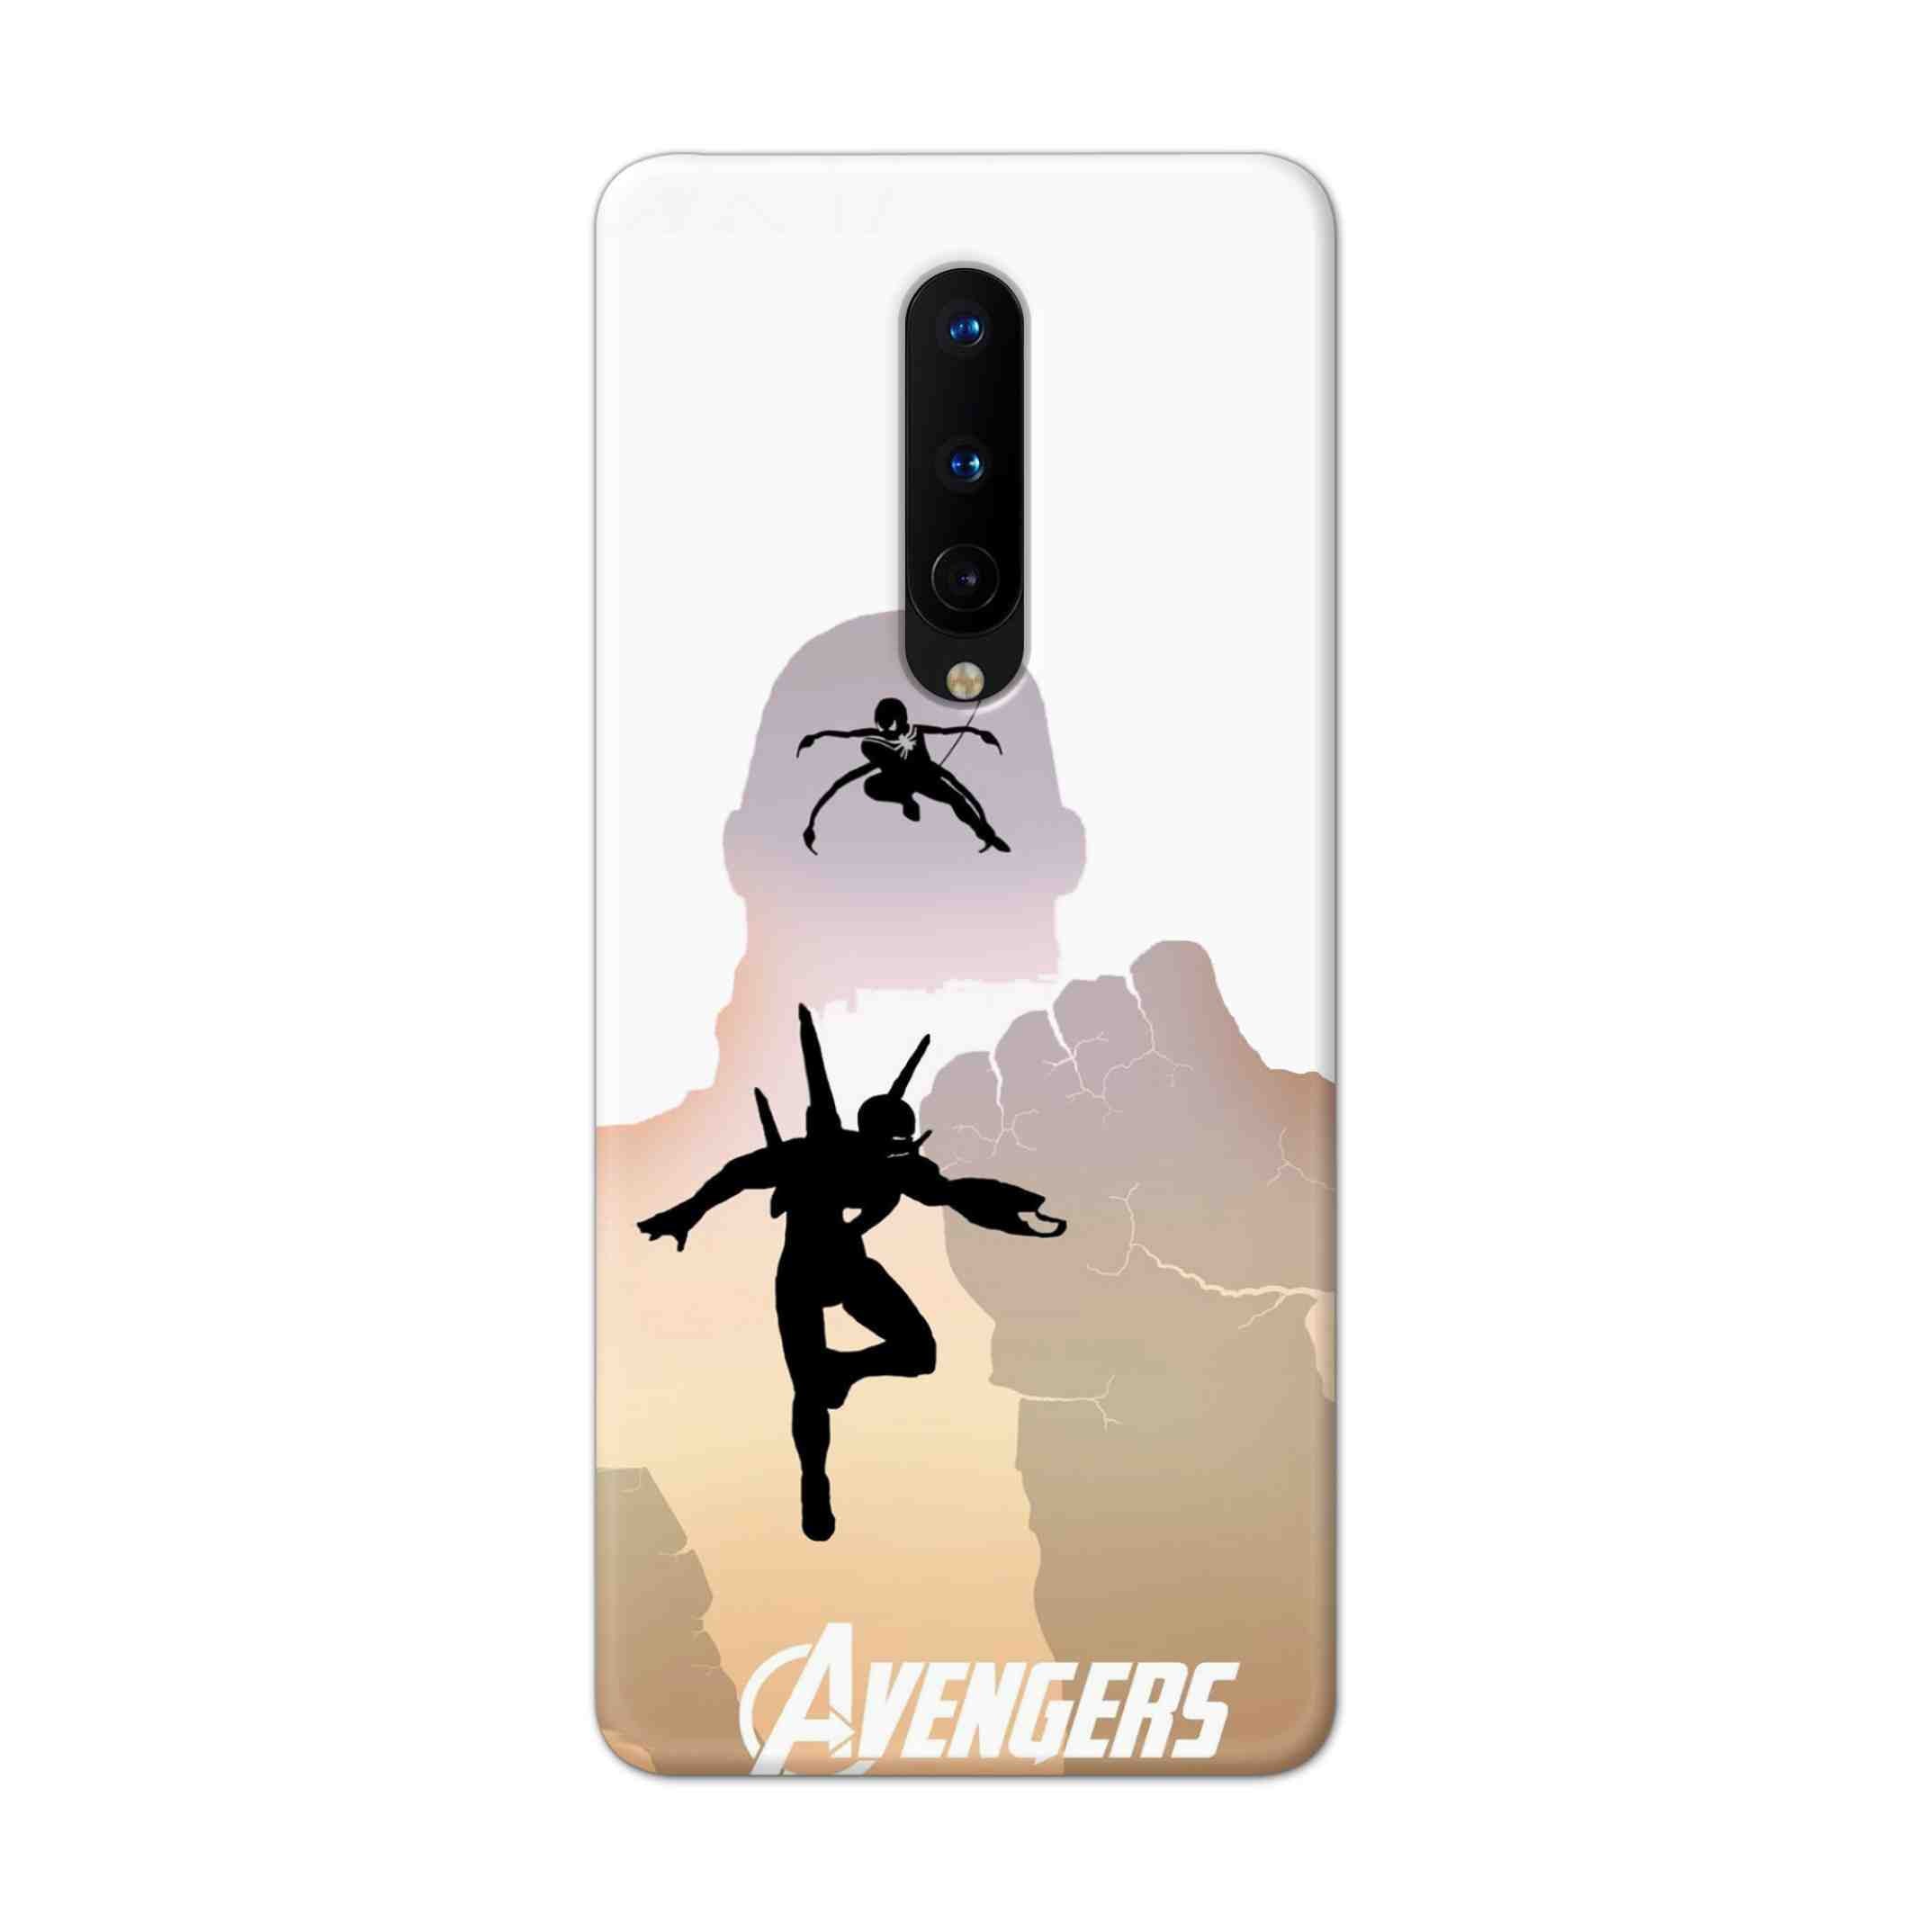 Buy Iron Man Vs Spiderman Hard Back Mobile Phone Case Cover For OnePlus 8 Online